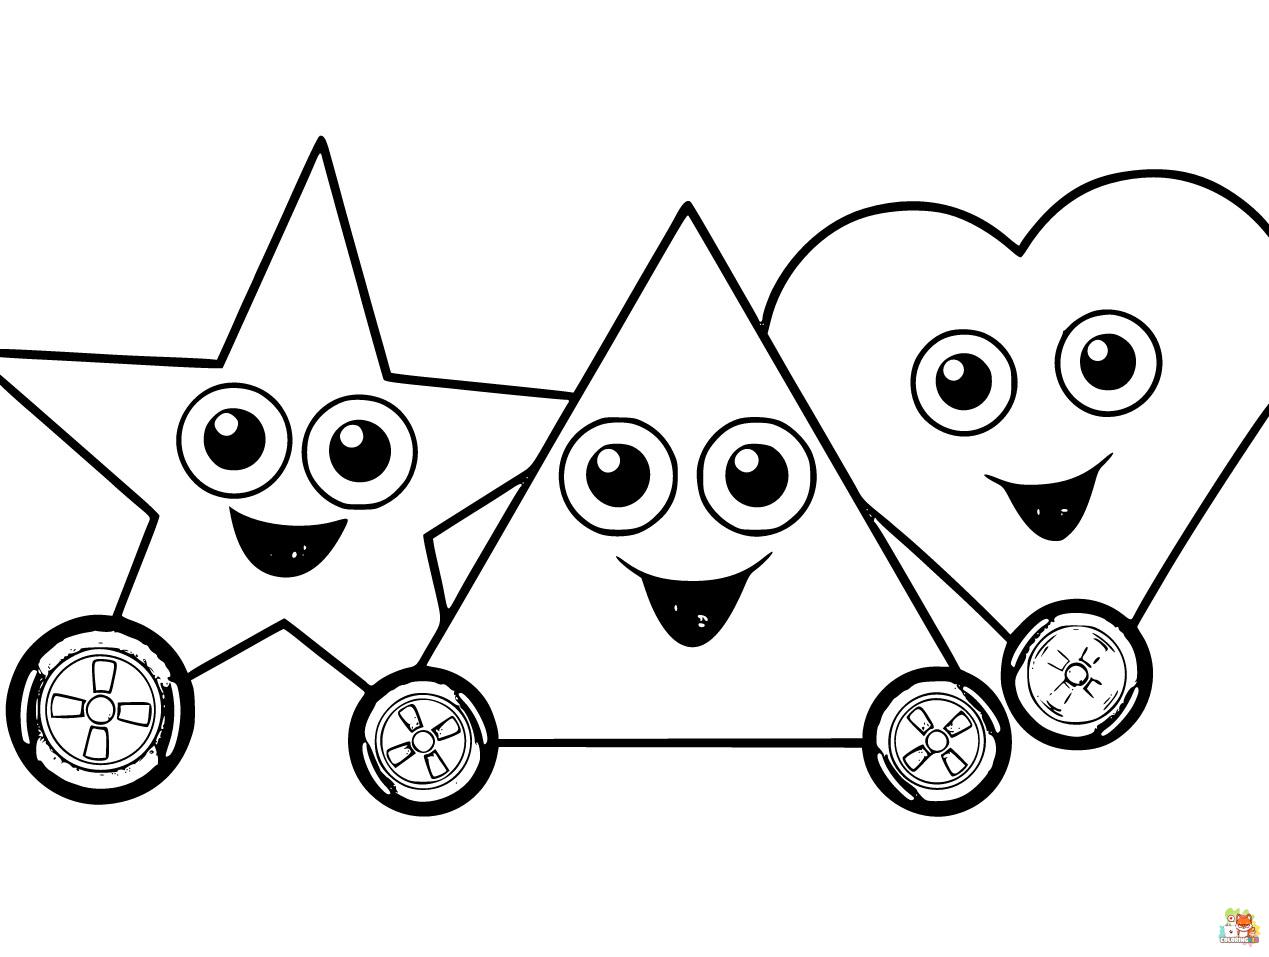 shapes coloring pages to print